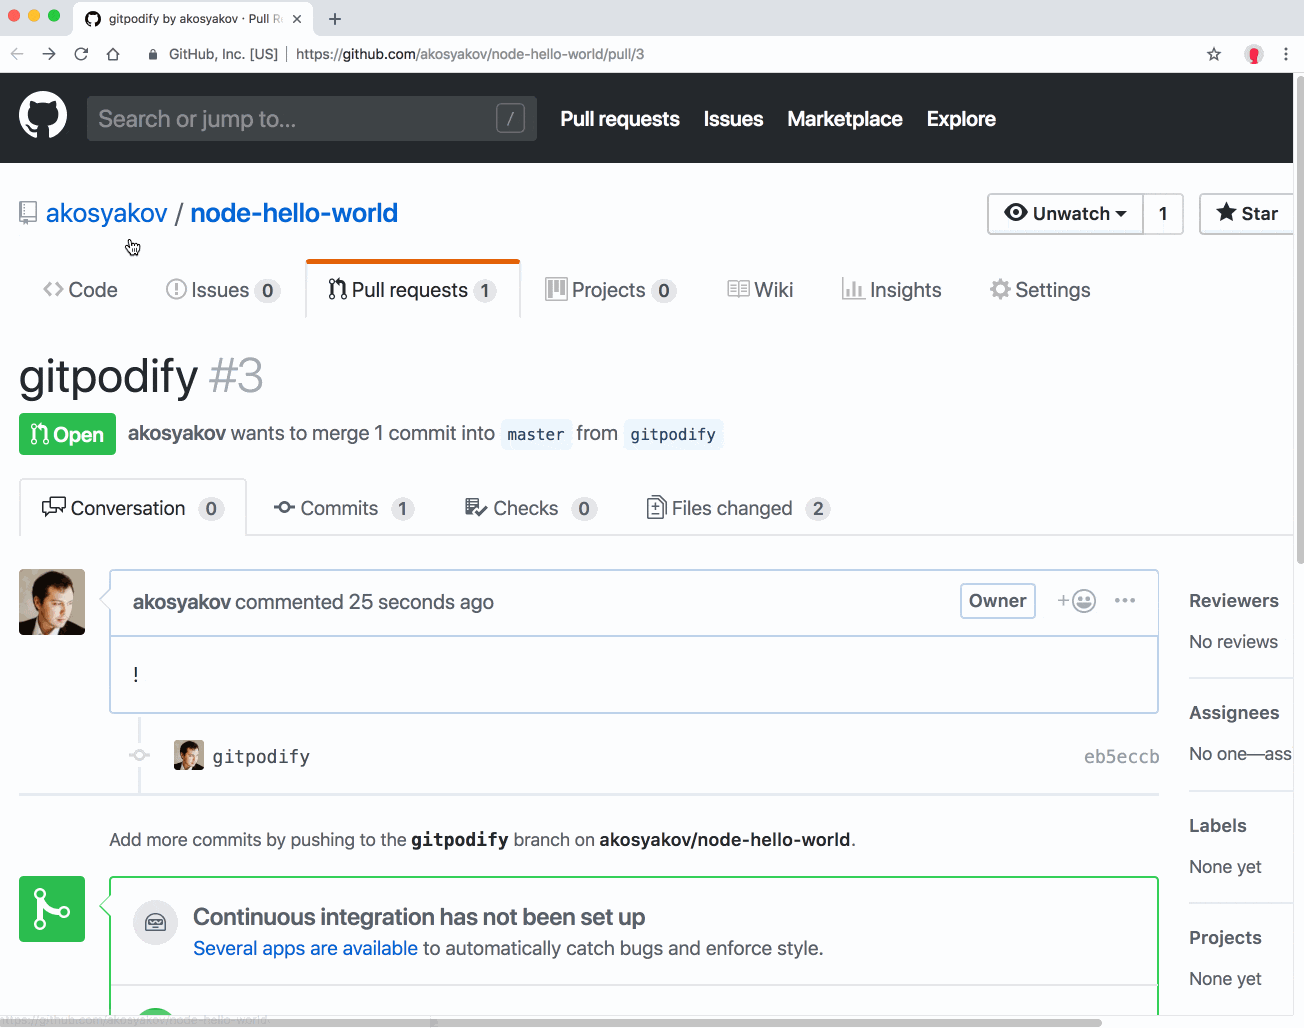 How to open a Gitpod workspace from a PR page on GitHub